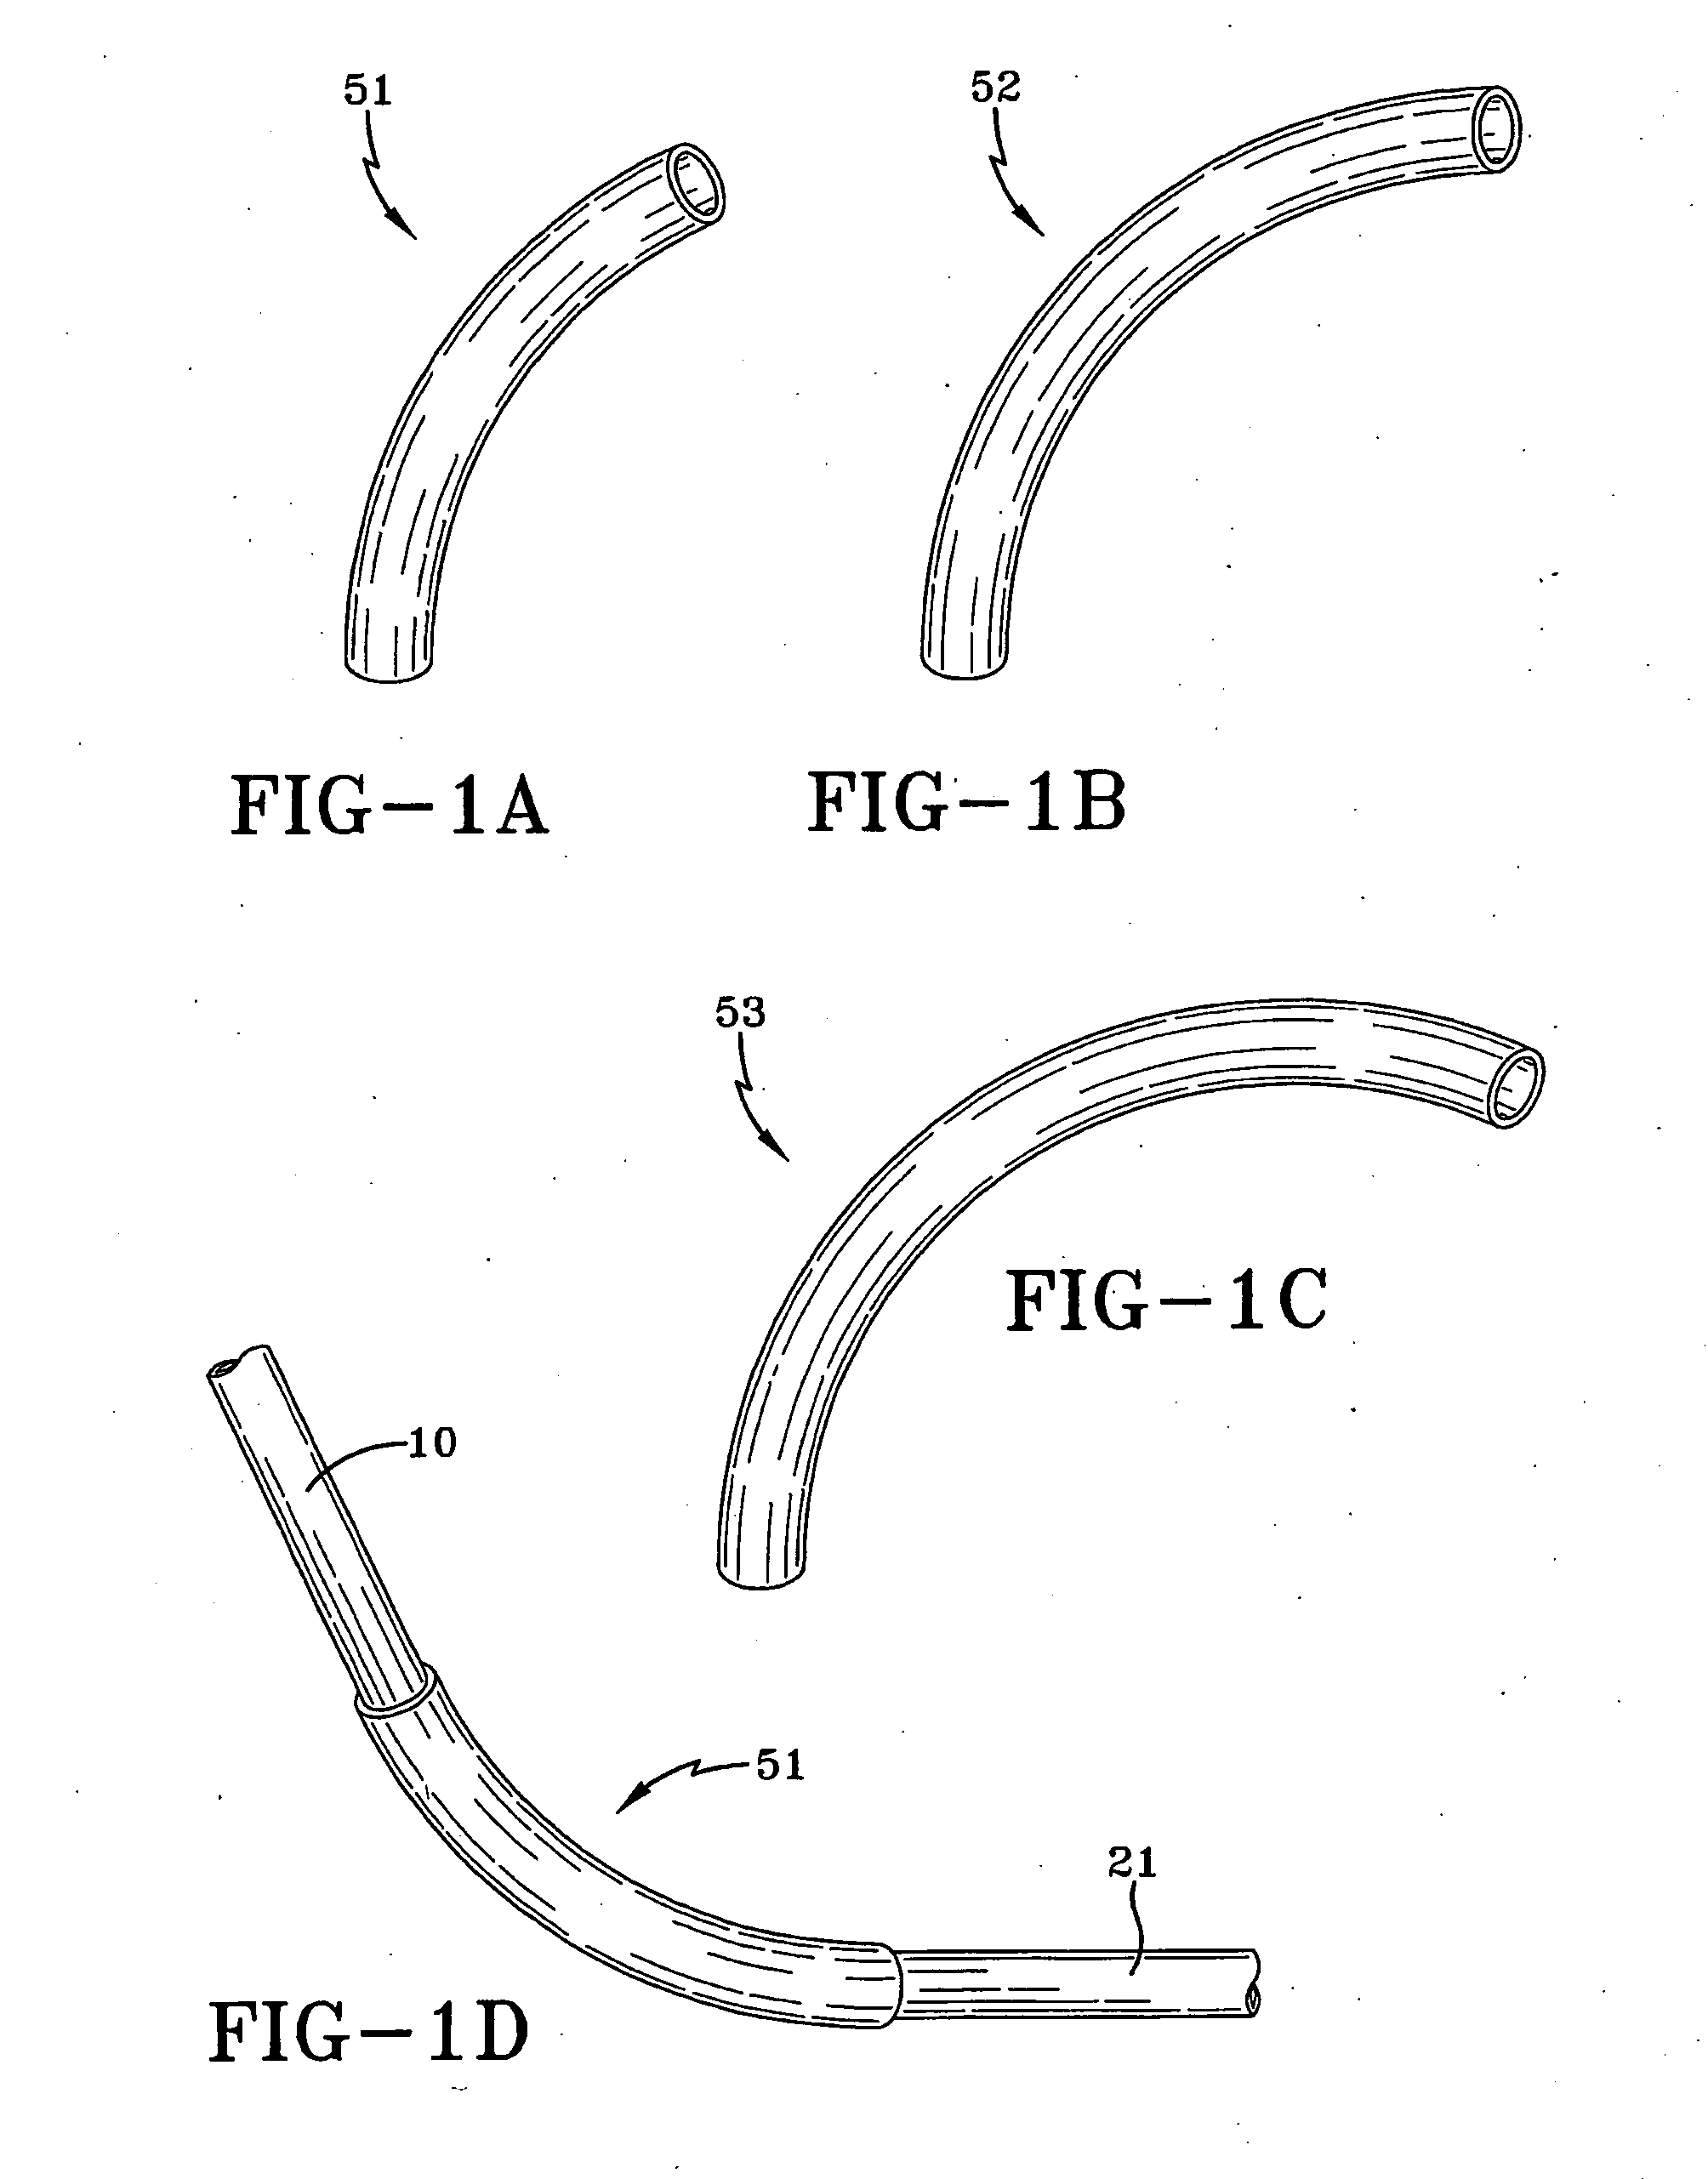 Pop-up SportsTraining Assemblies & Related Devices and Methods